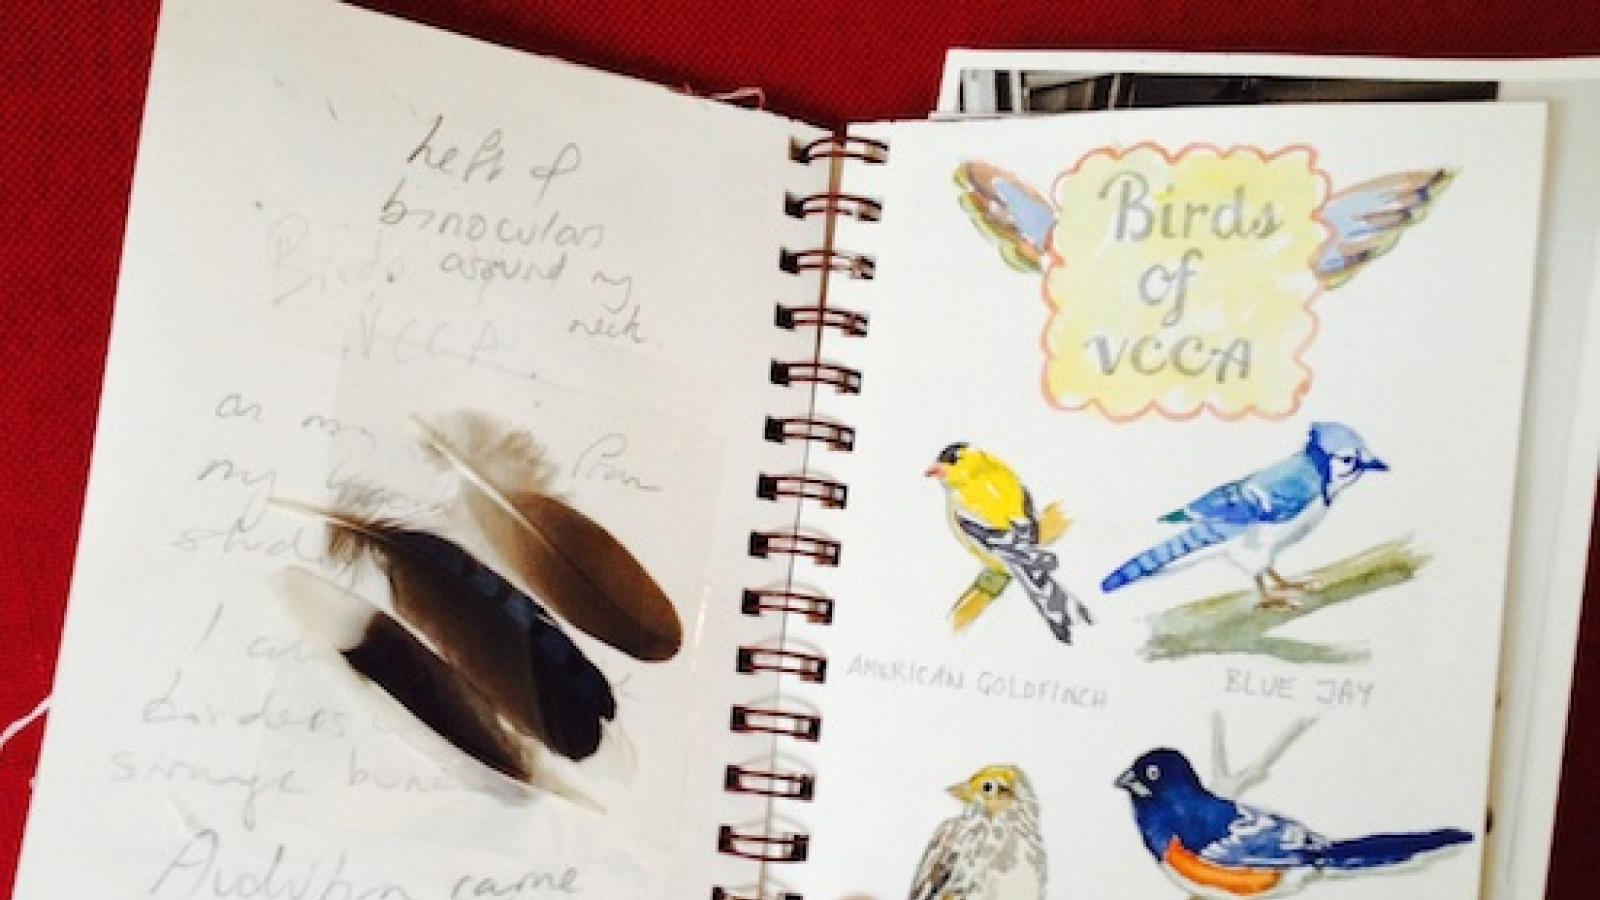 Photograph of an open journal. The left page has writing superimposed by three feathers. The right page has colorful sketches of four birds with a winged caption box that says "Birds of VCCA"